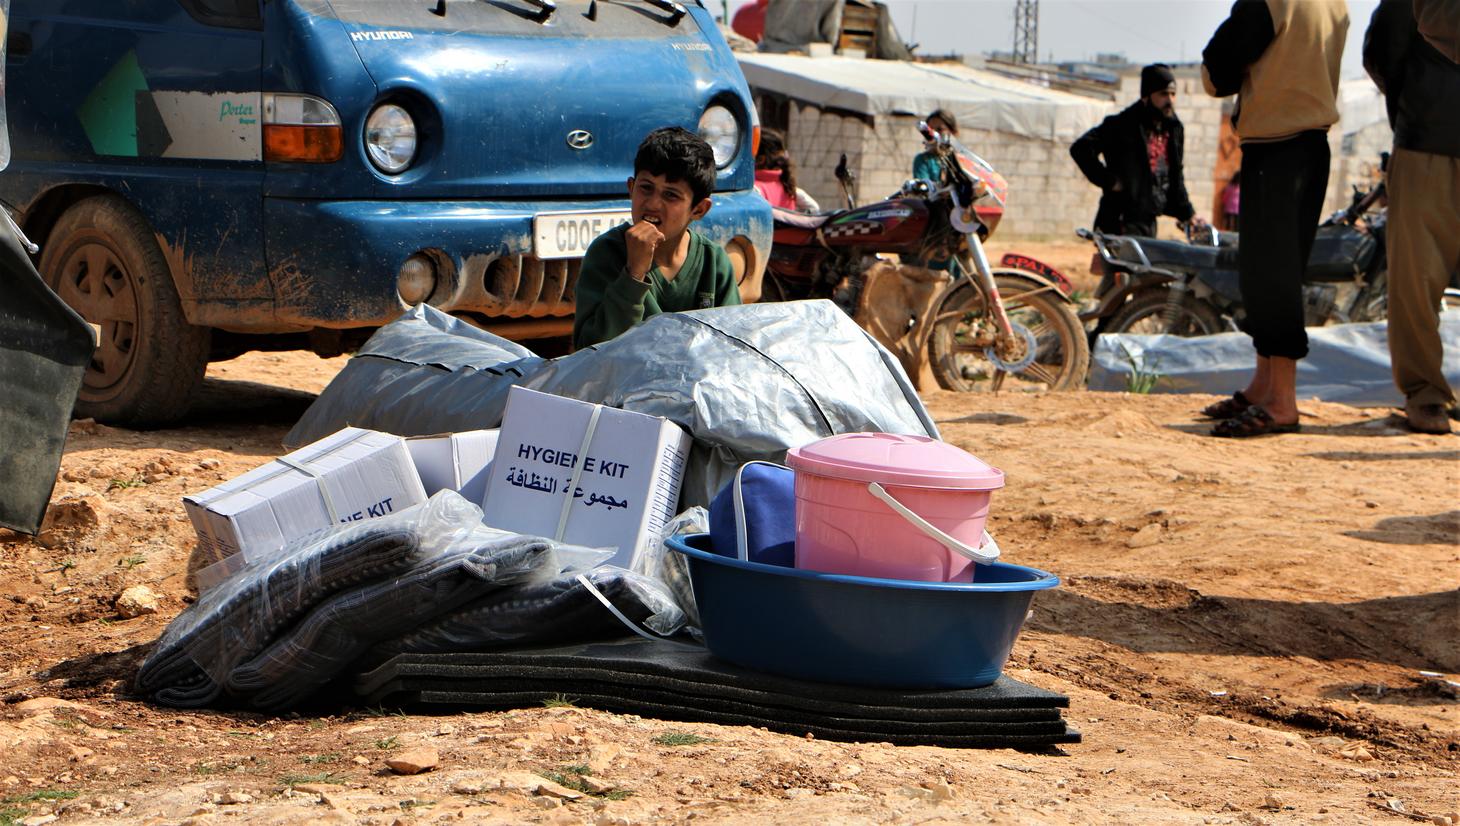 MSF distributing tents and NFIs in Al habeet area.